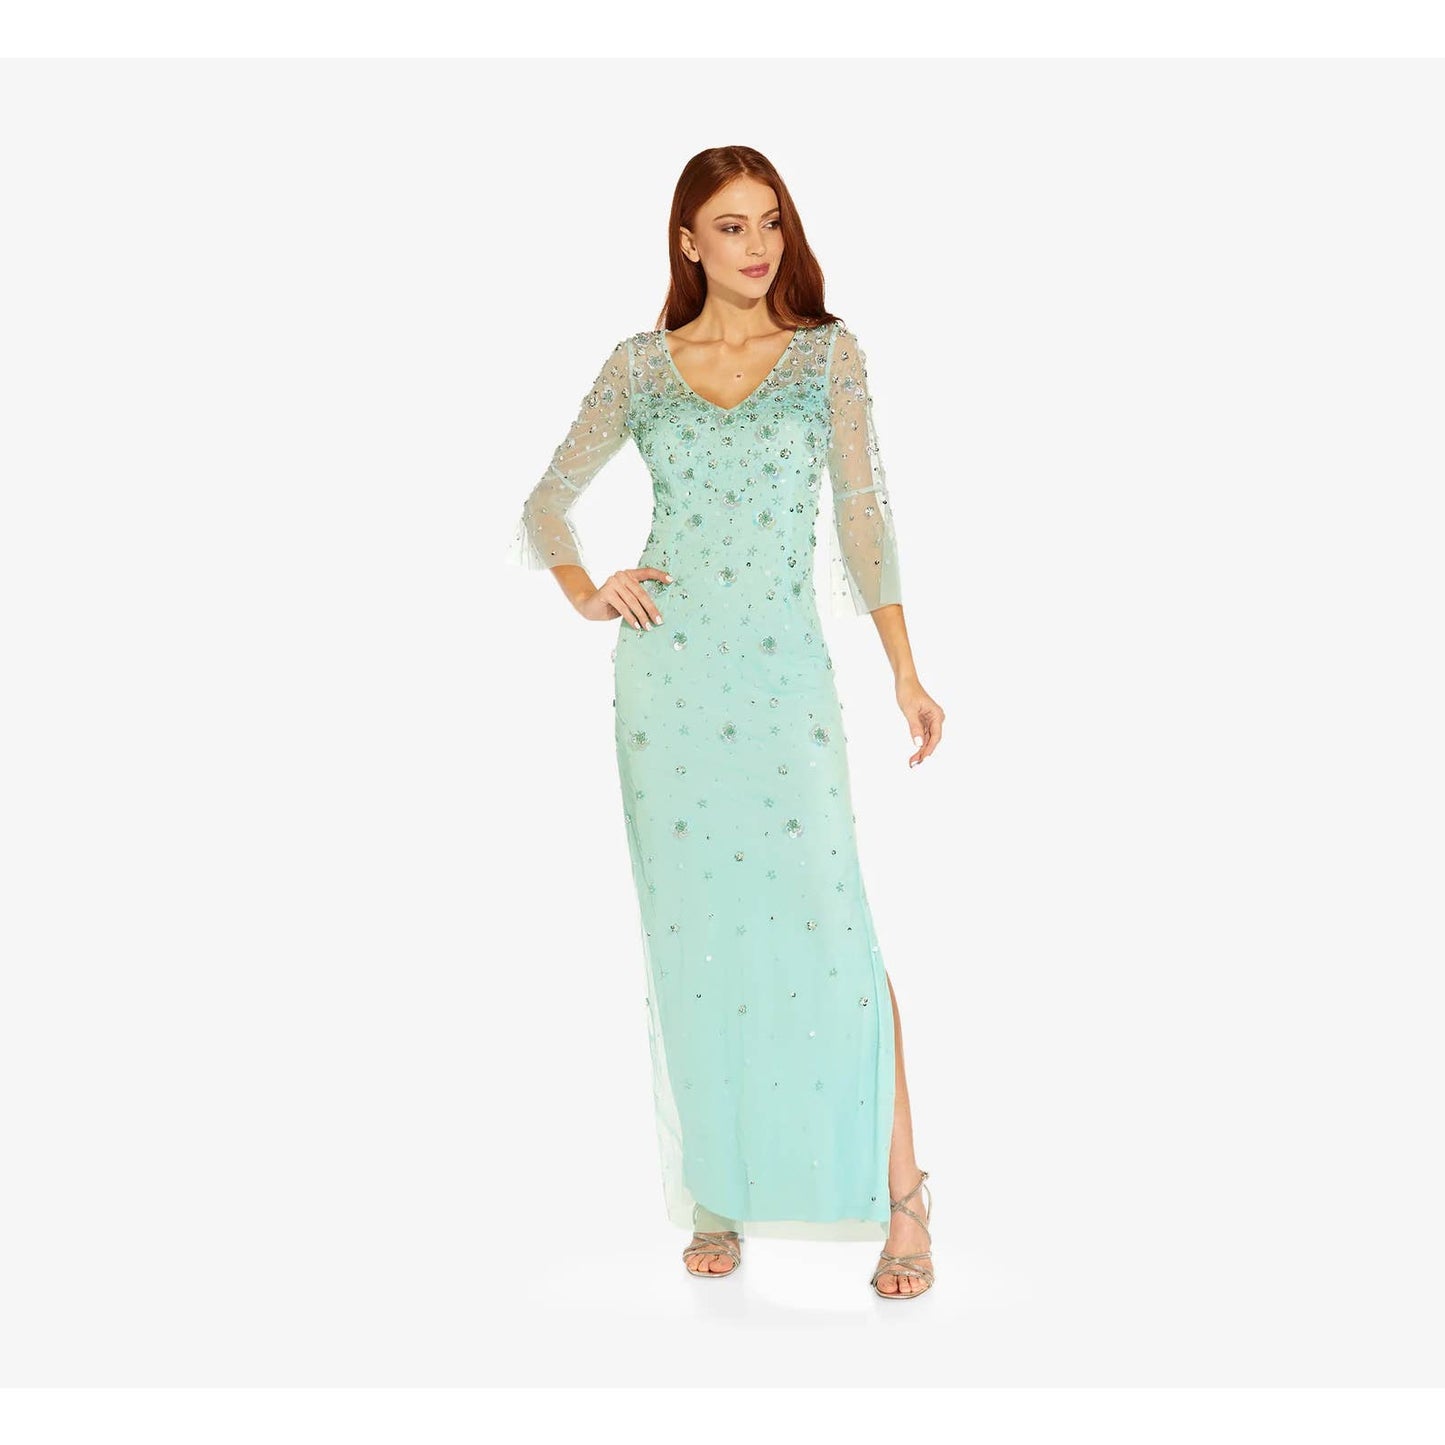 ADRIANNA PAPELL Women's Sea Glass Beaded 3D Floral V-Neck 3/4 Sleeve Maxi Gown